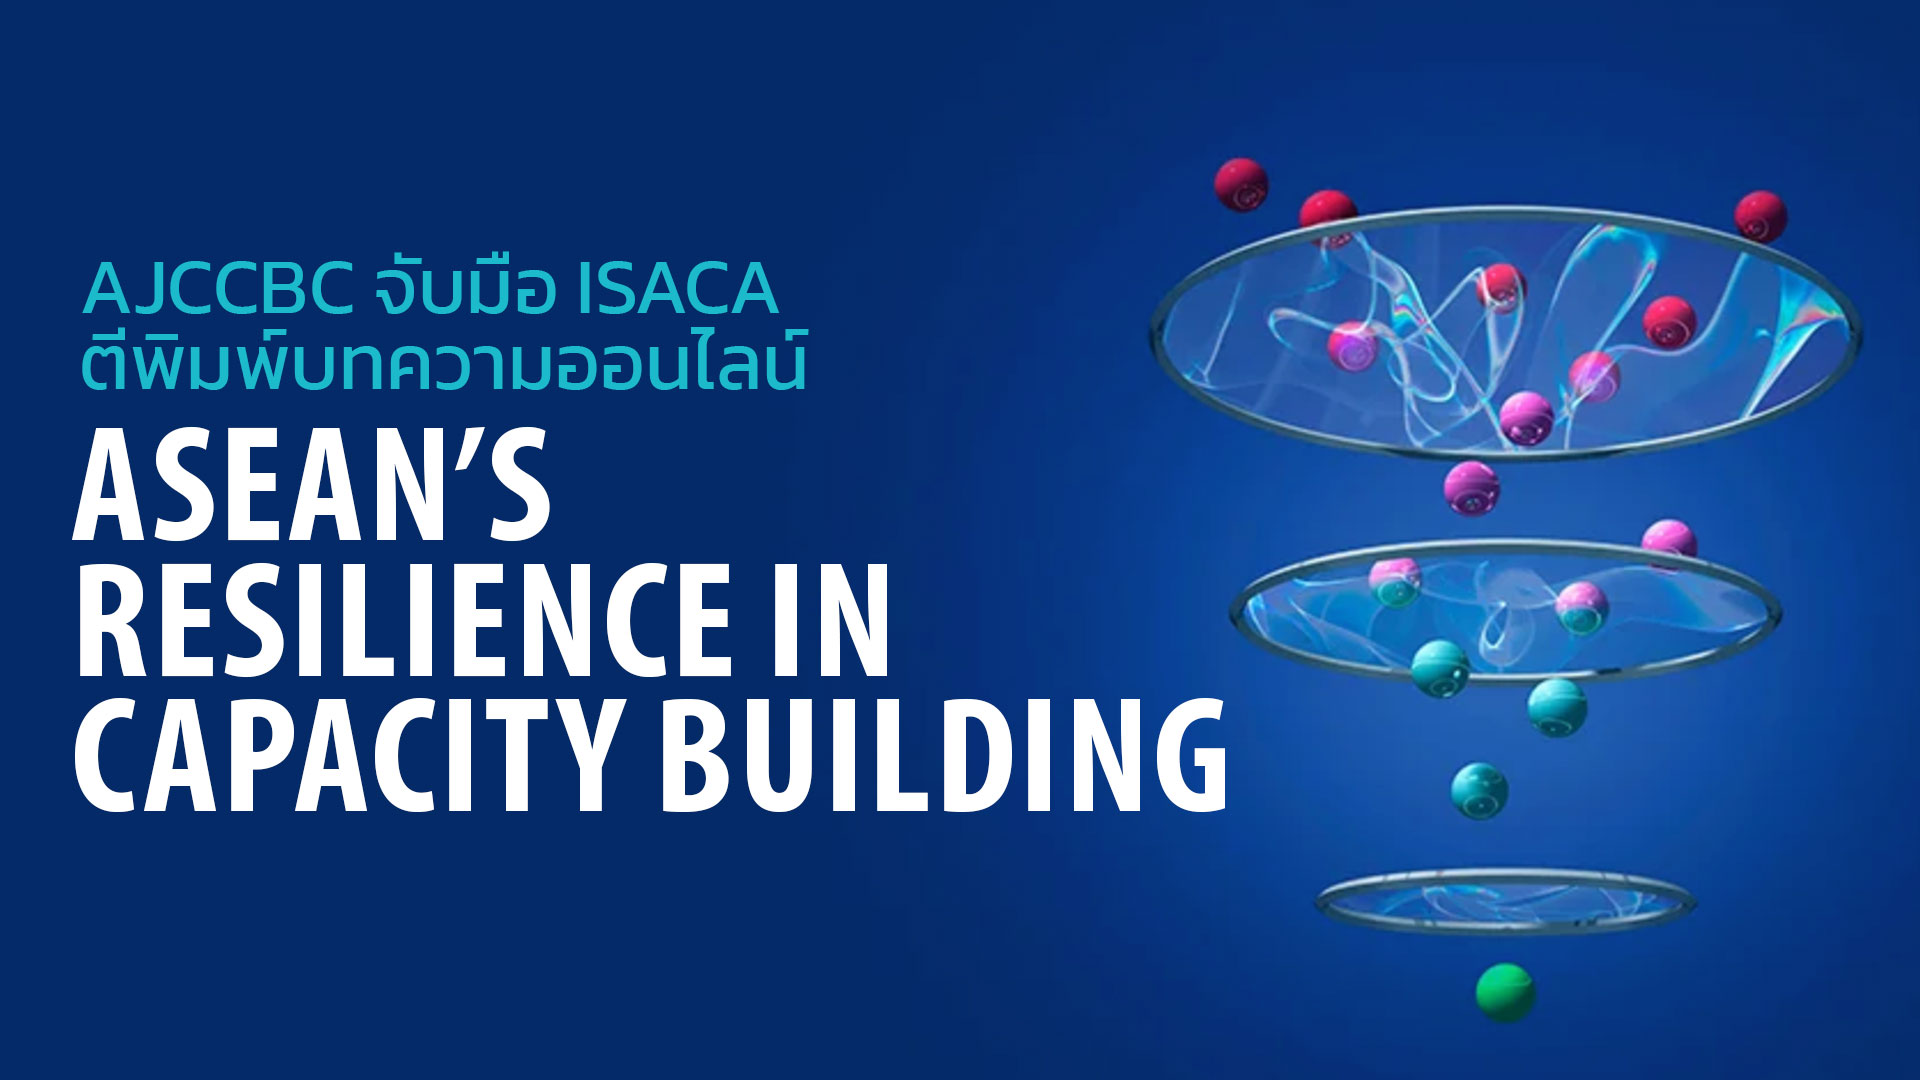 AJCCBC จับมือ ISACA ตีพิมพ์บทความออนไลน์ “ASEAN’s Resilience in Capacity Building”